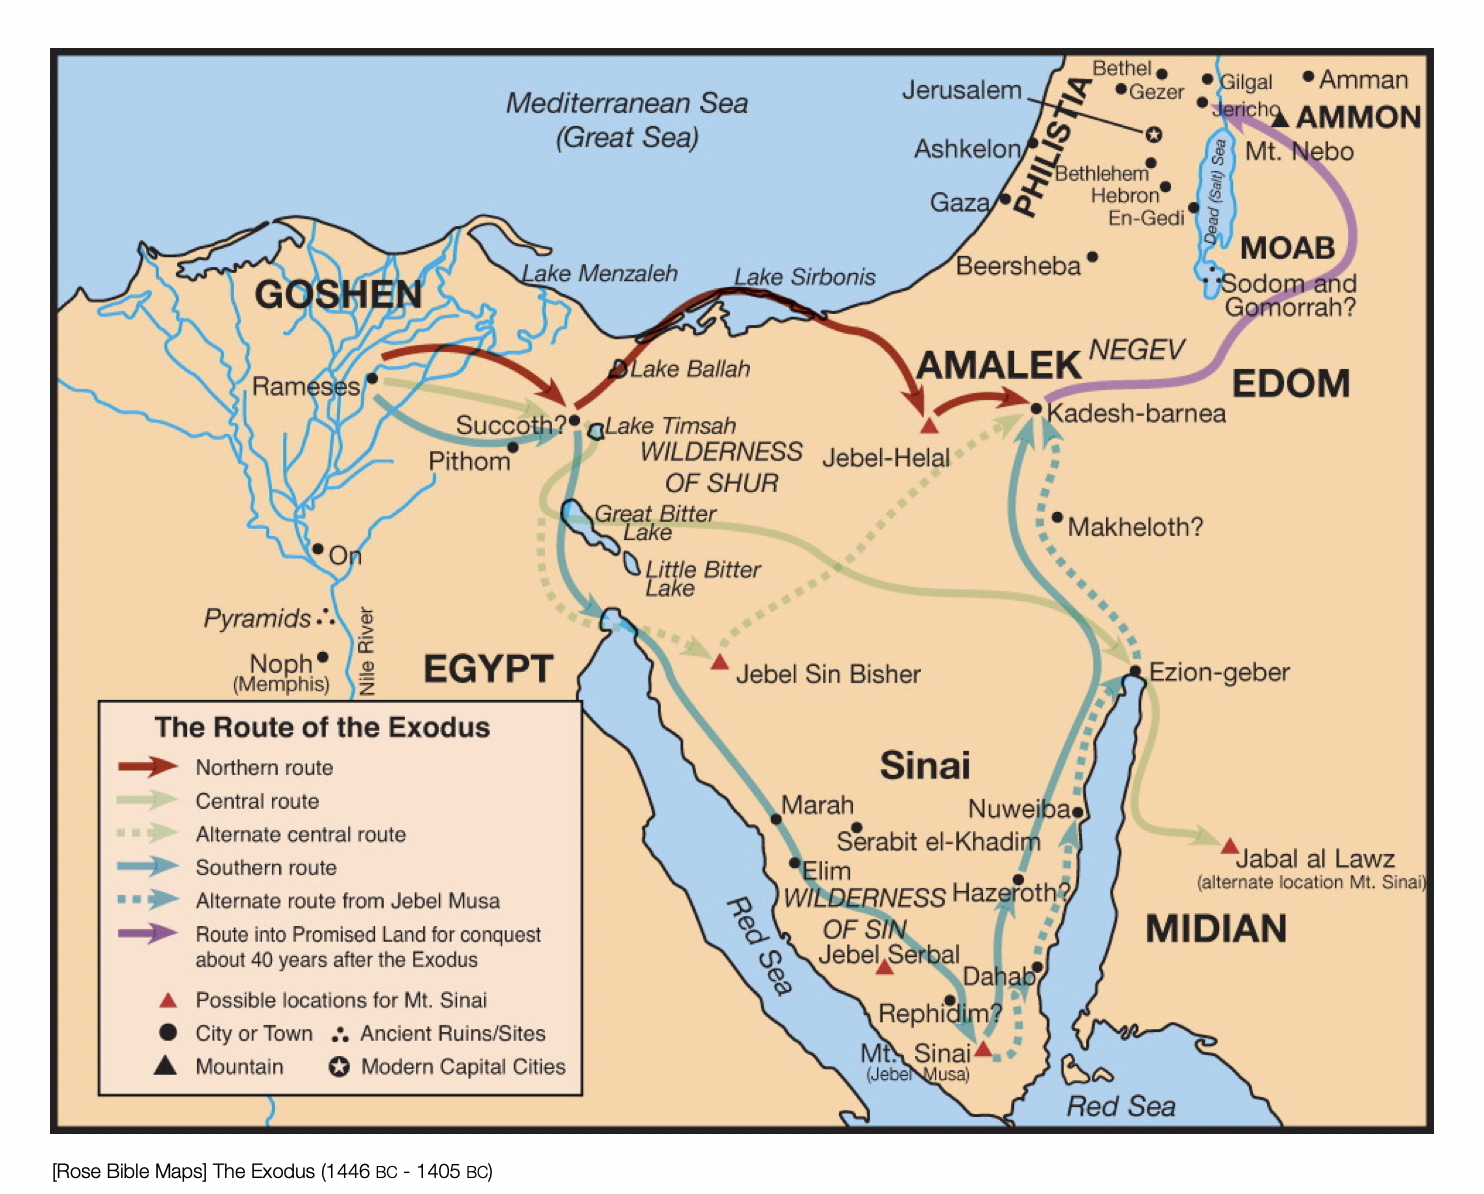 Routes of the Exodus according to the Rose Bible Guide.